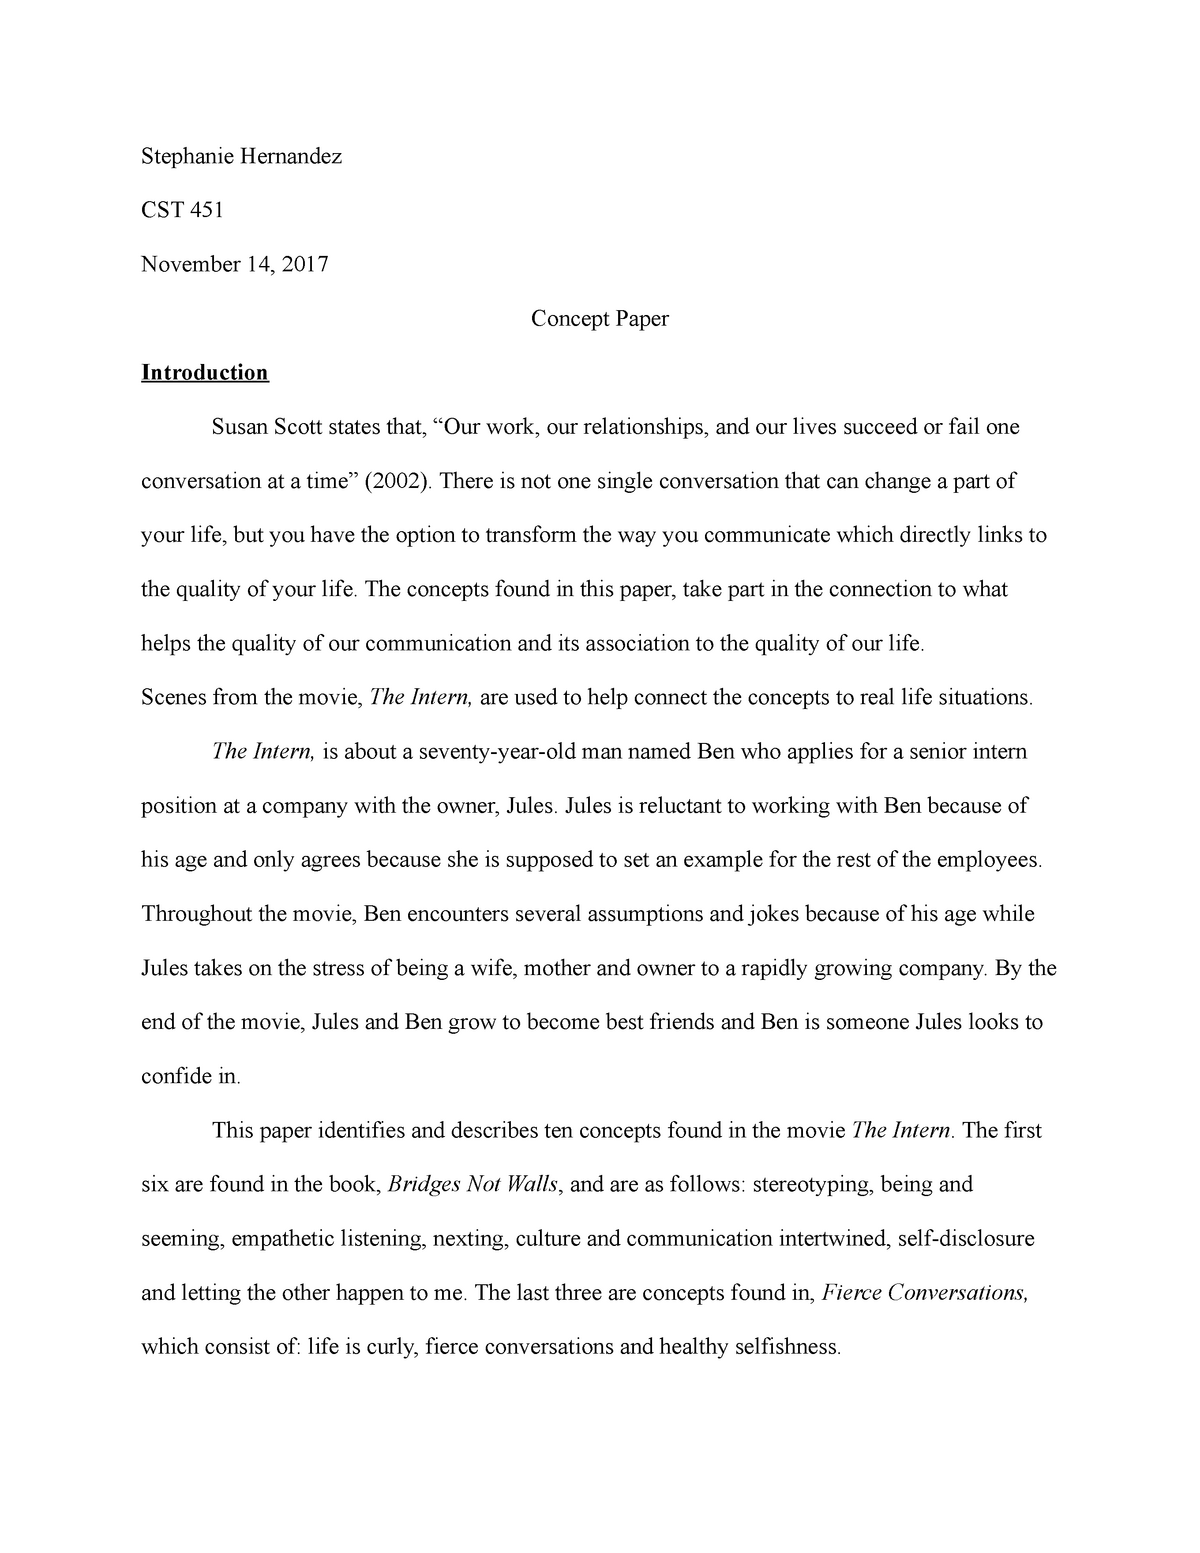 introduction of concept paper essay